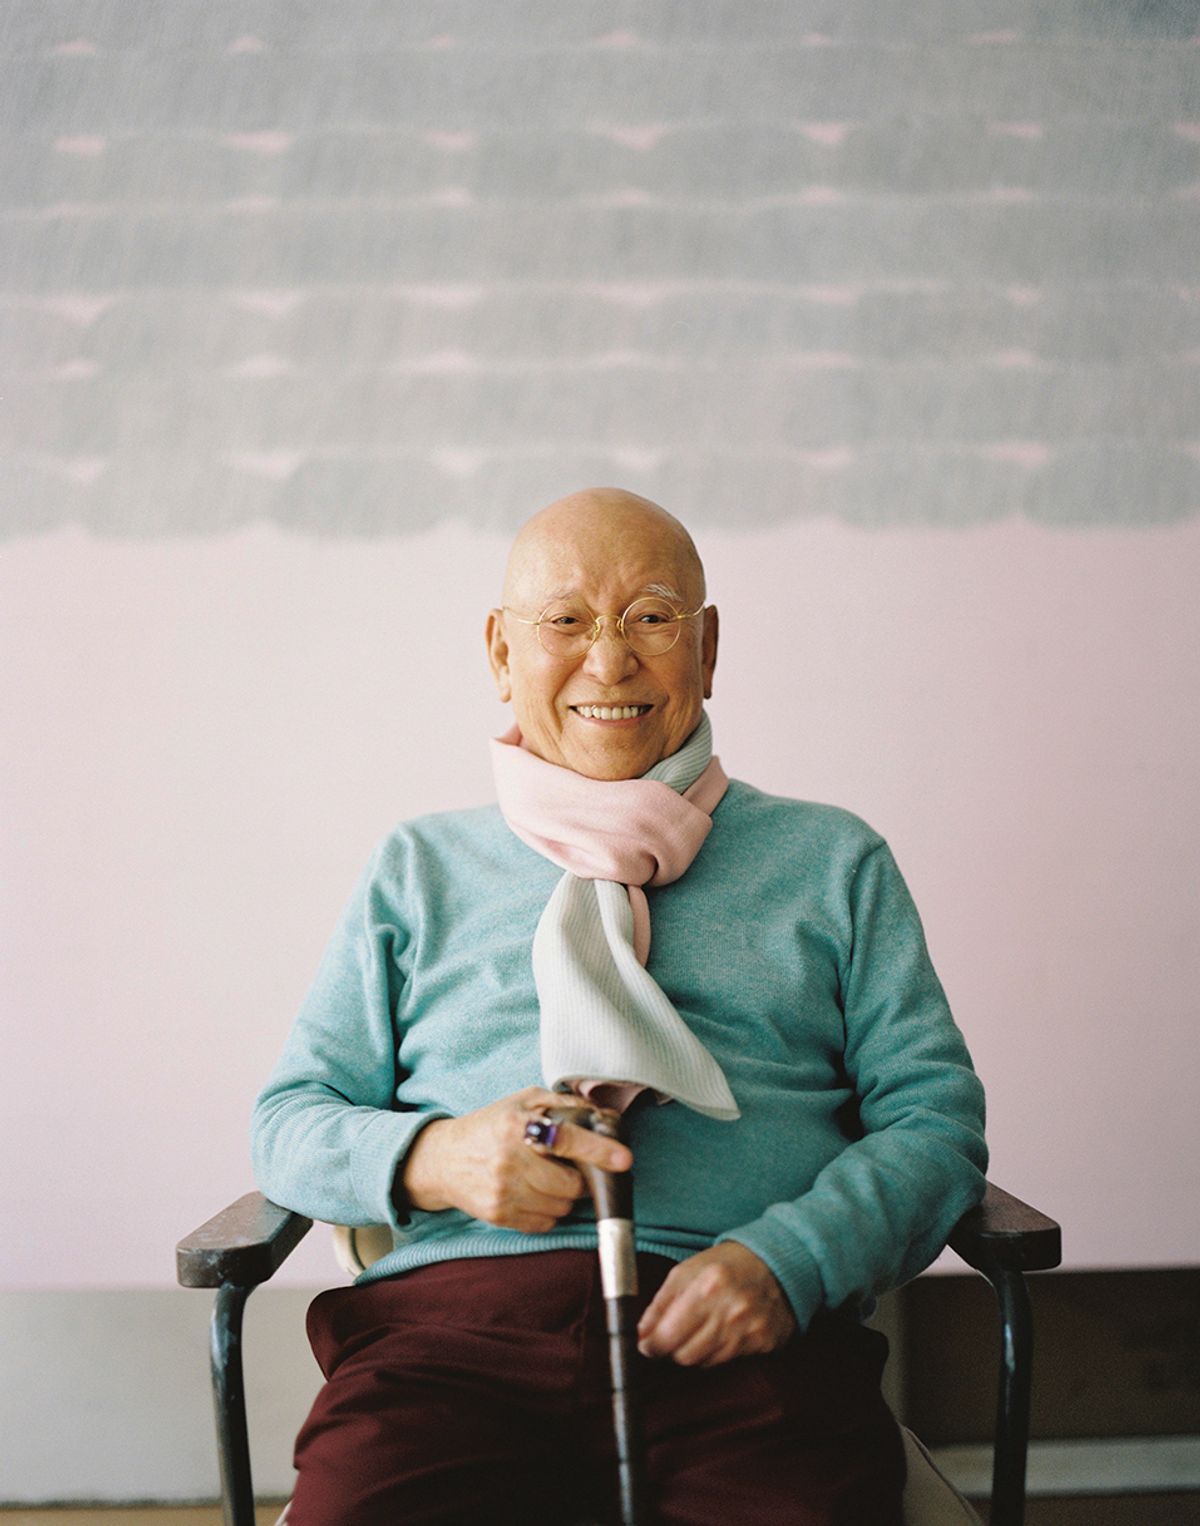 Best known for his Écriture series, the artist and educator Park Seo-Bo was one of South Korea’s most successful artists
Photo: Courtesy Park Seo-Bo Foundation